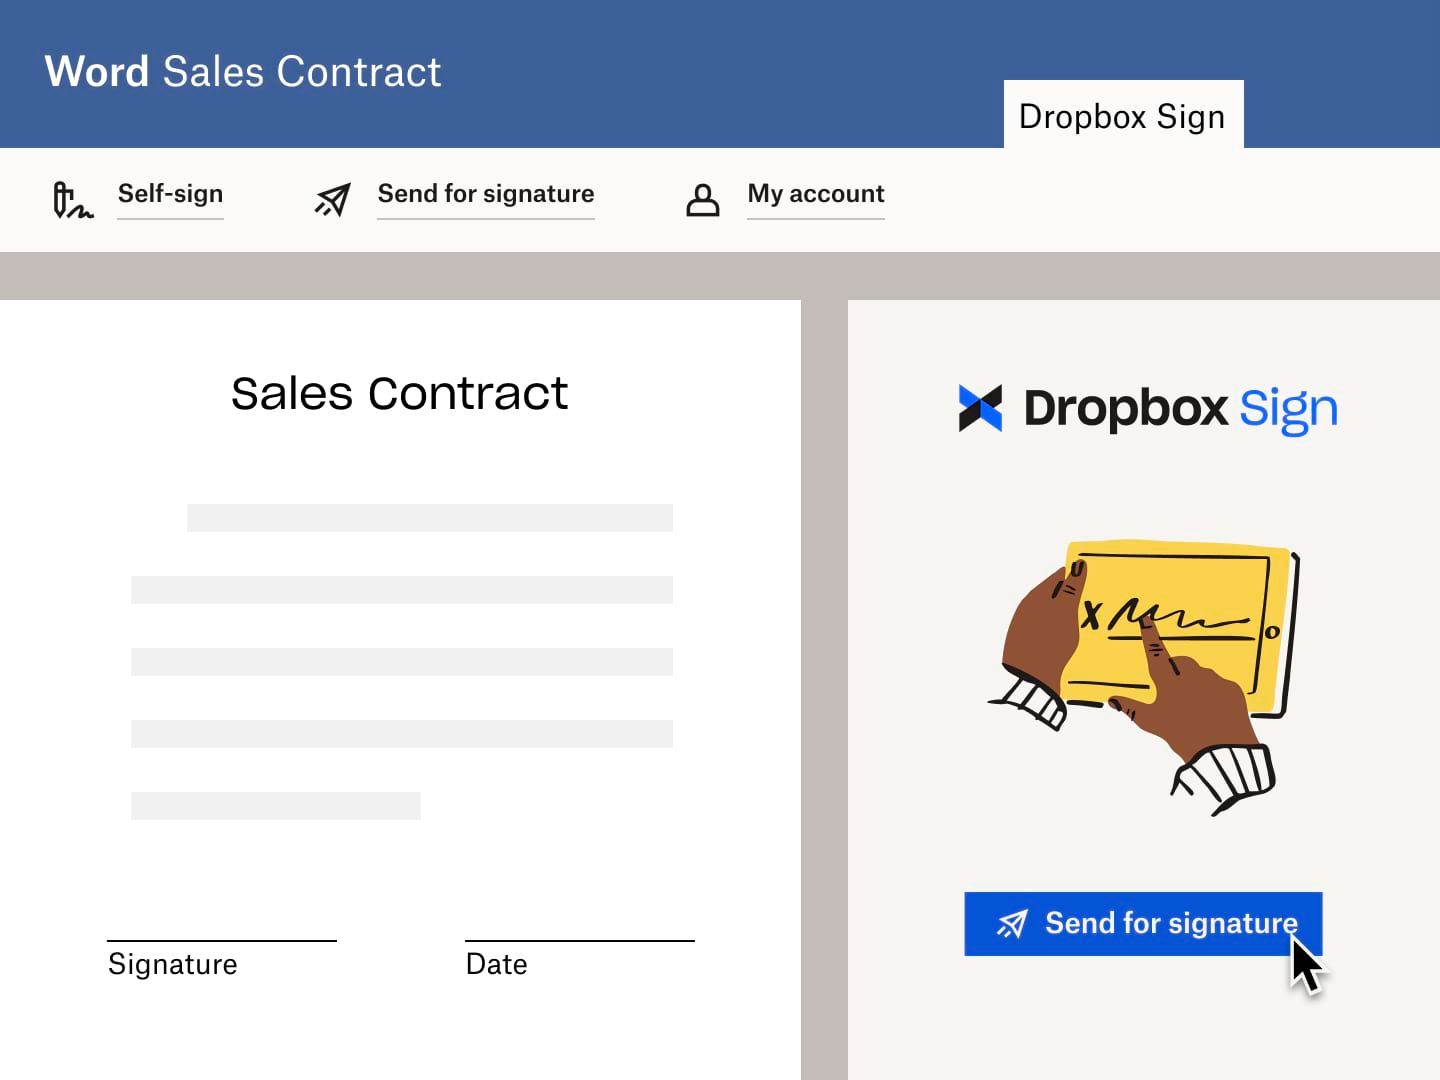 User sends a sales contract in Microsoft Word with a Dropbox Sign eSignature request